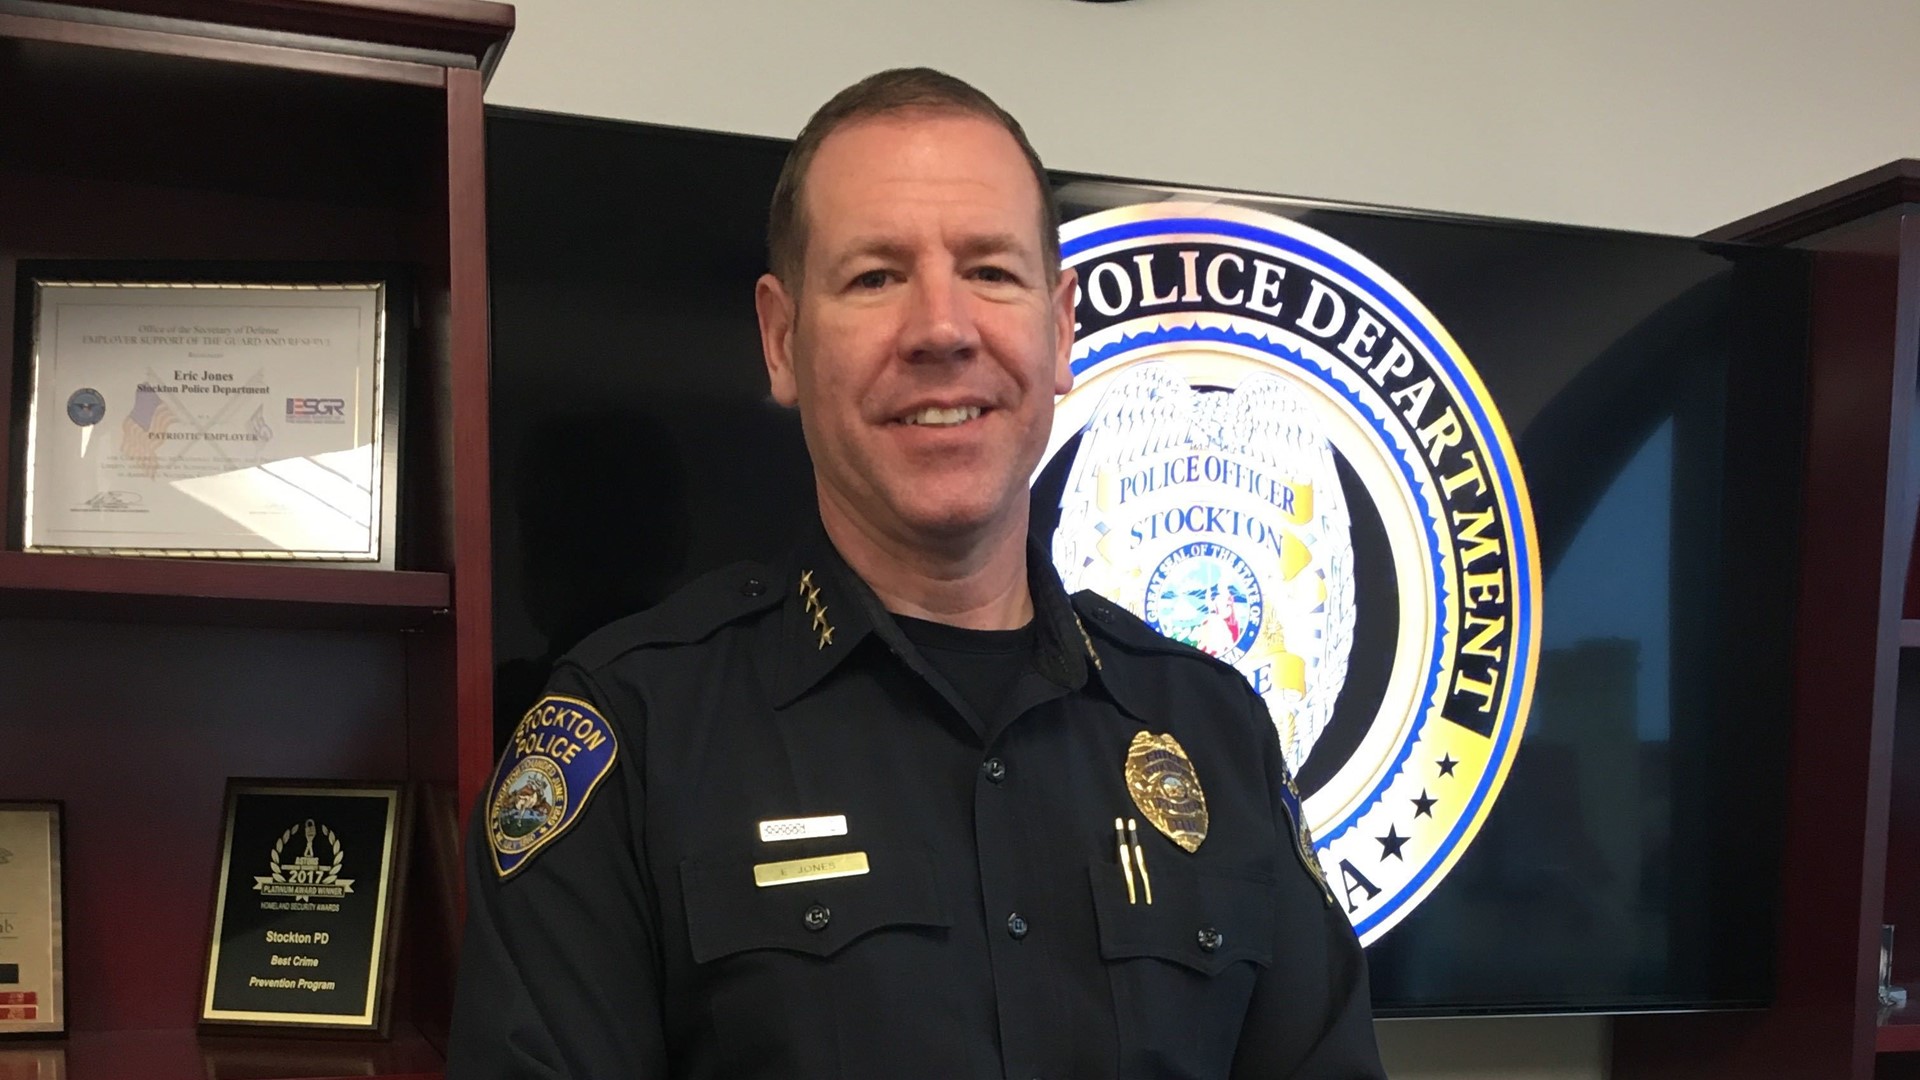 Chief Eric Jones announced Tuesday he will retire after nearly 30 years of service with the department.